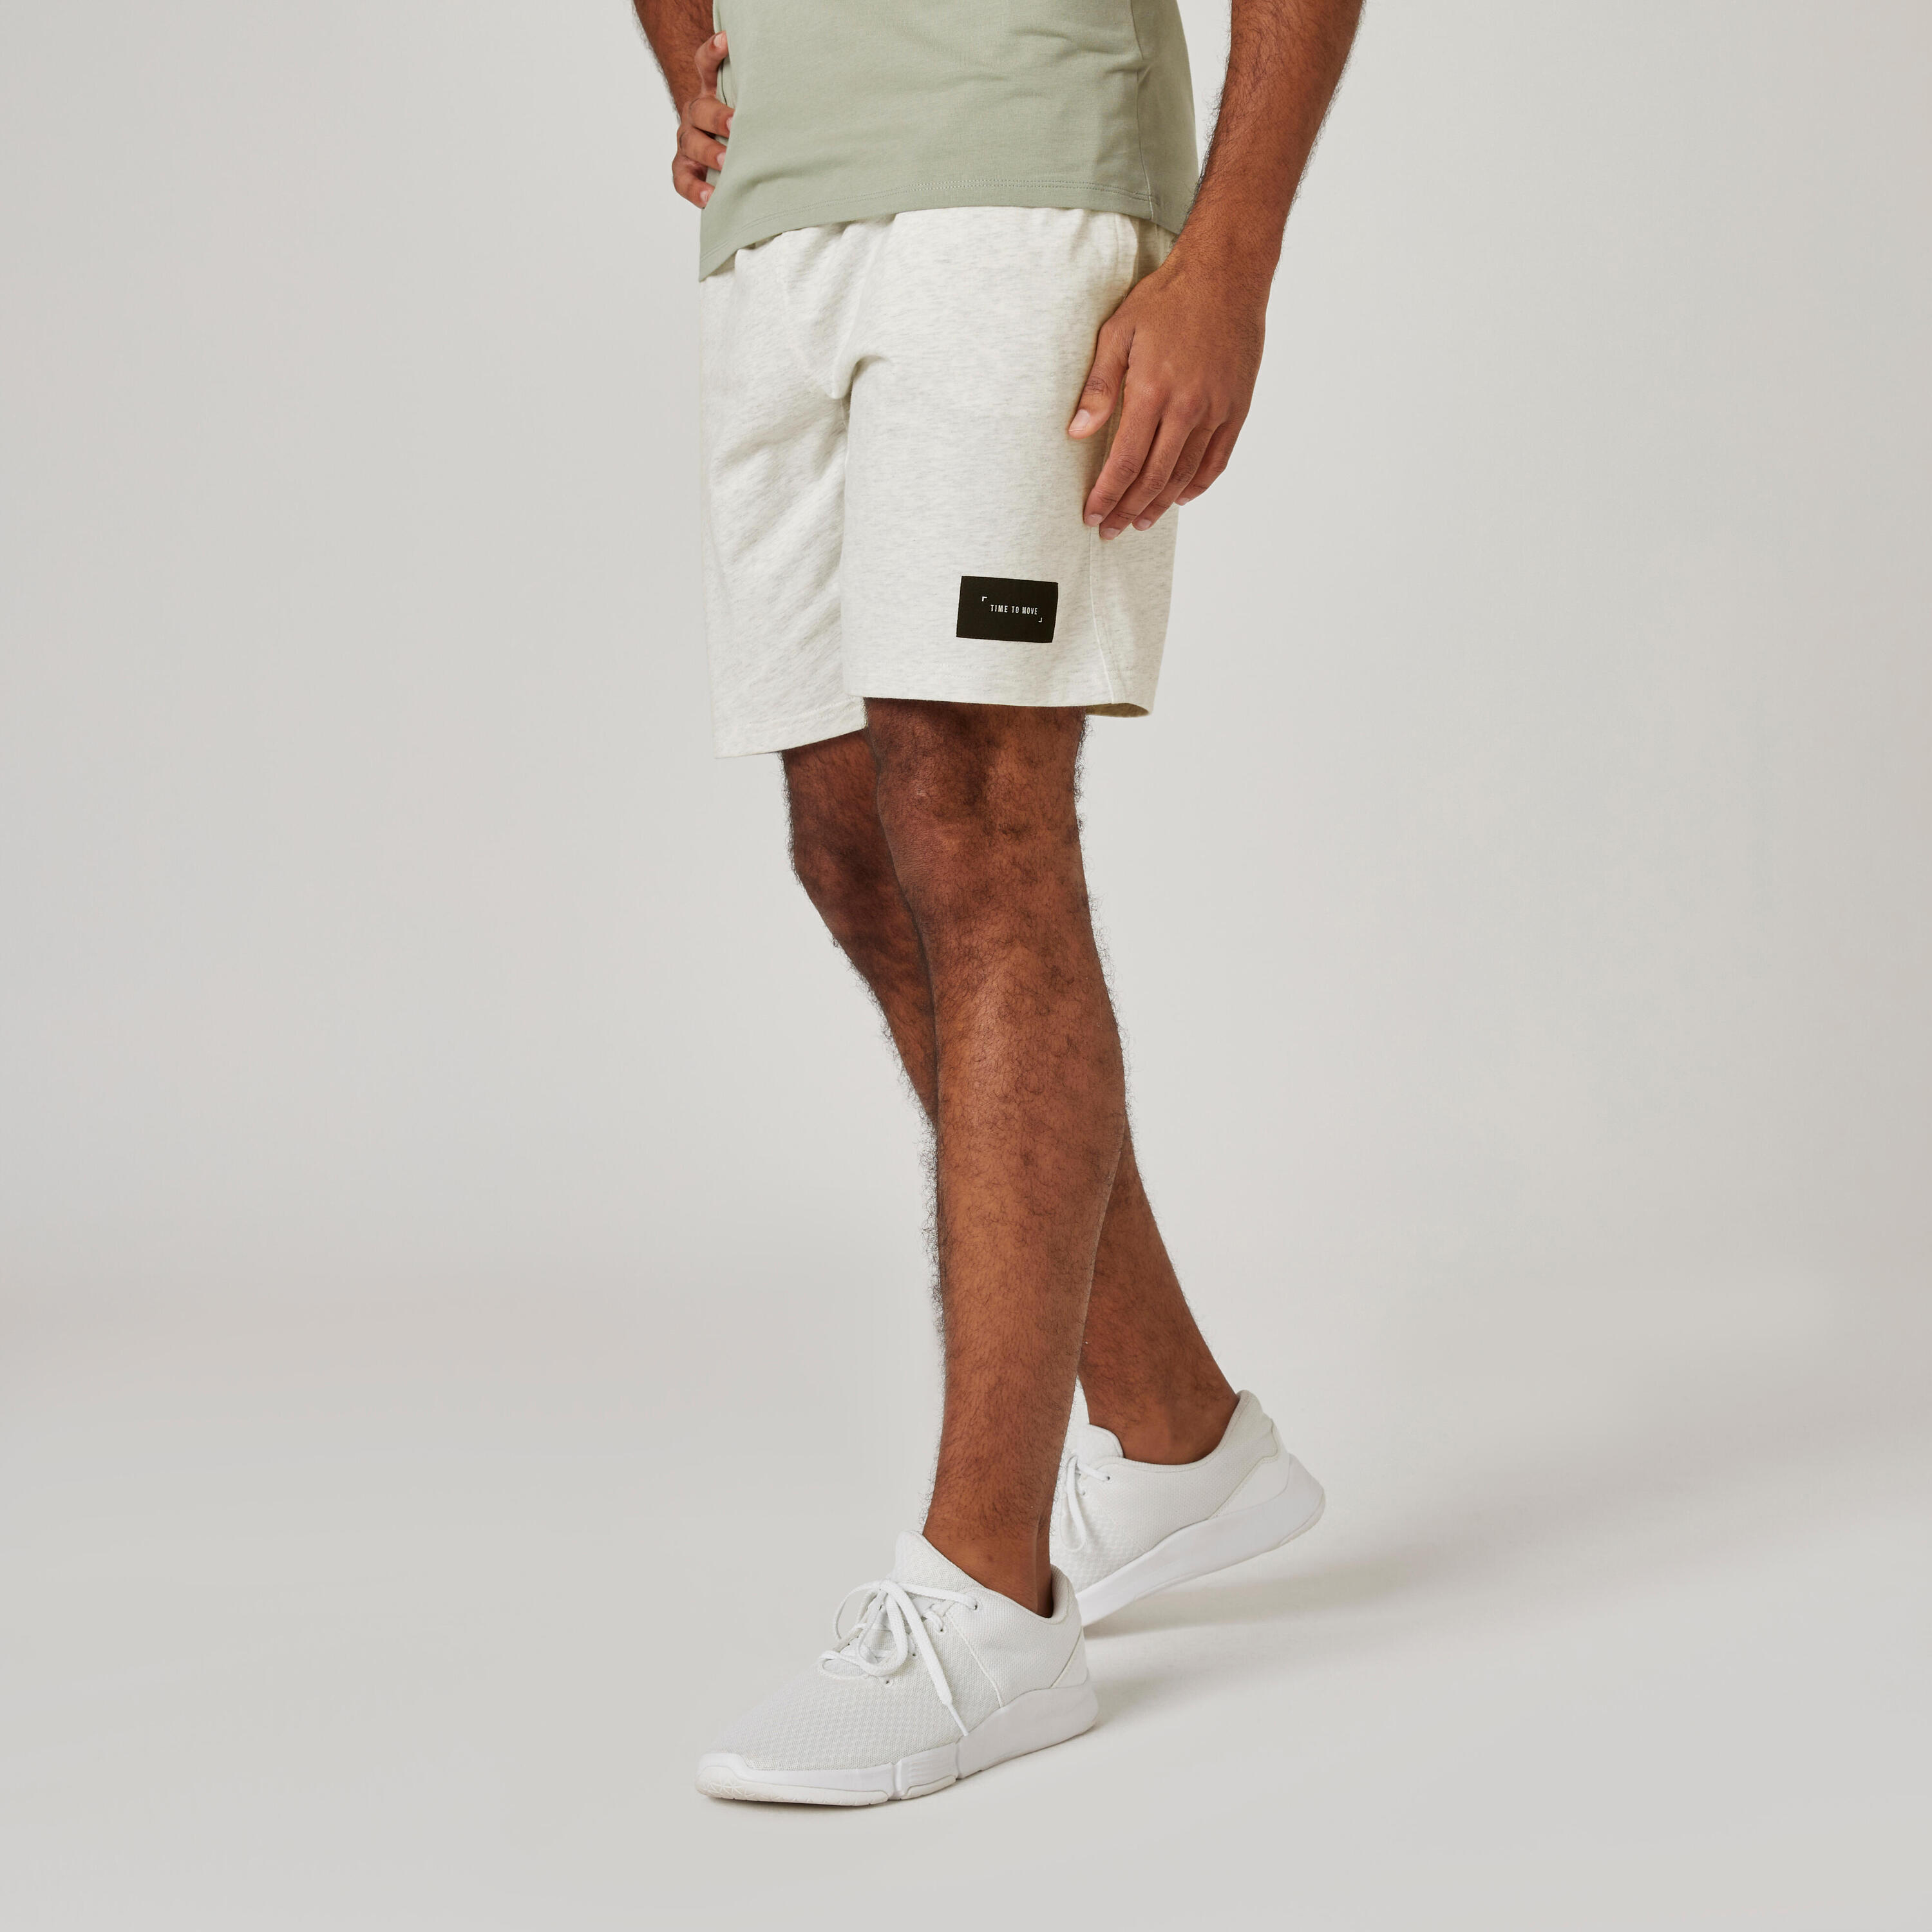 DOMYOS Men's Straight-Cut Cotton Fitness Shorts with Pocket - White